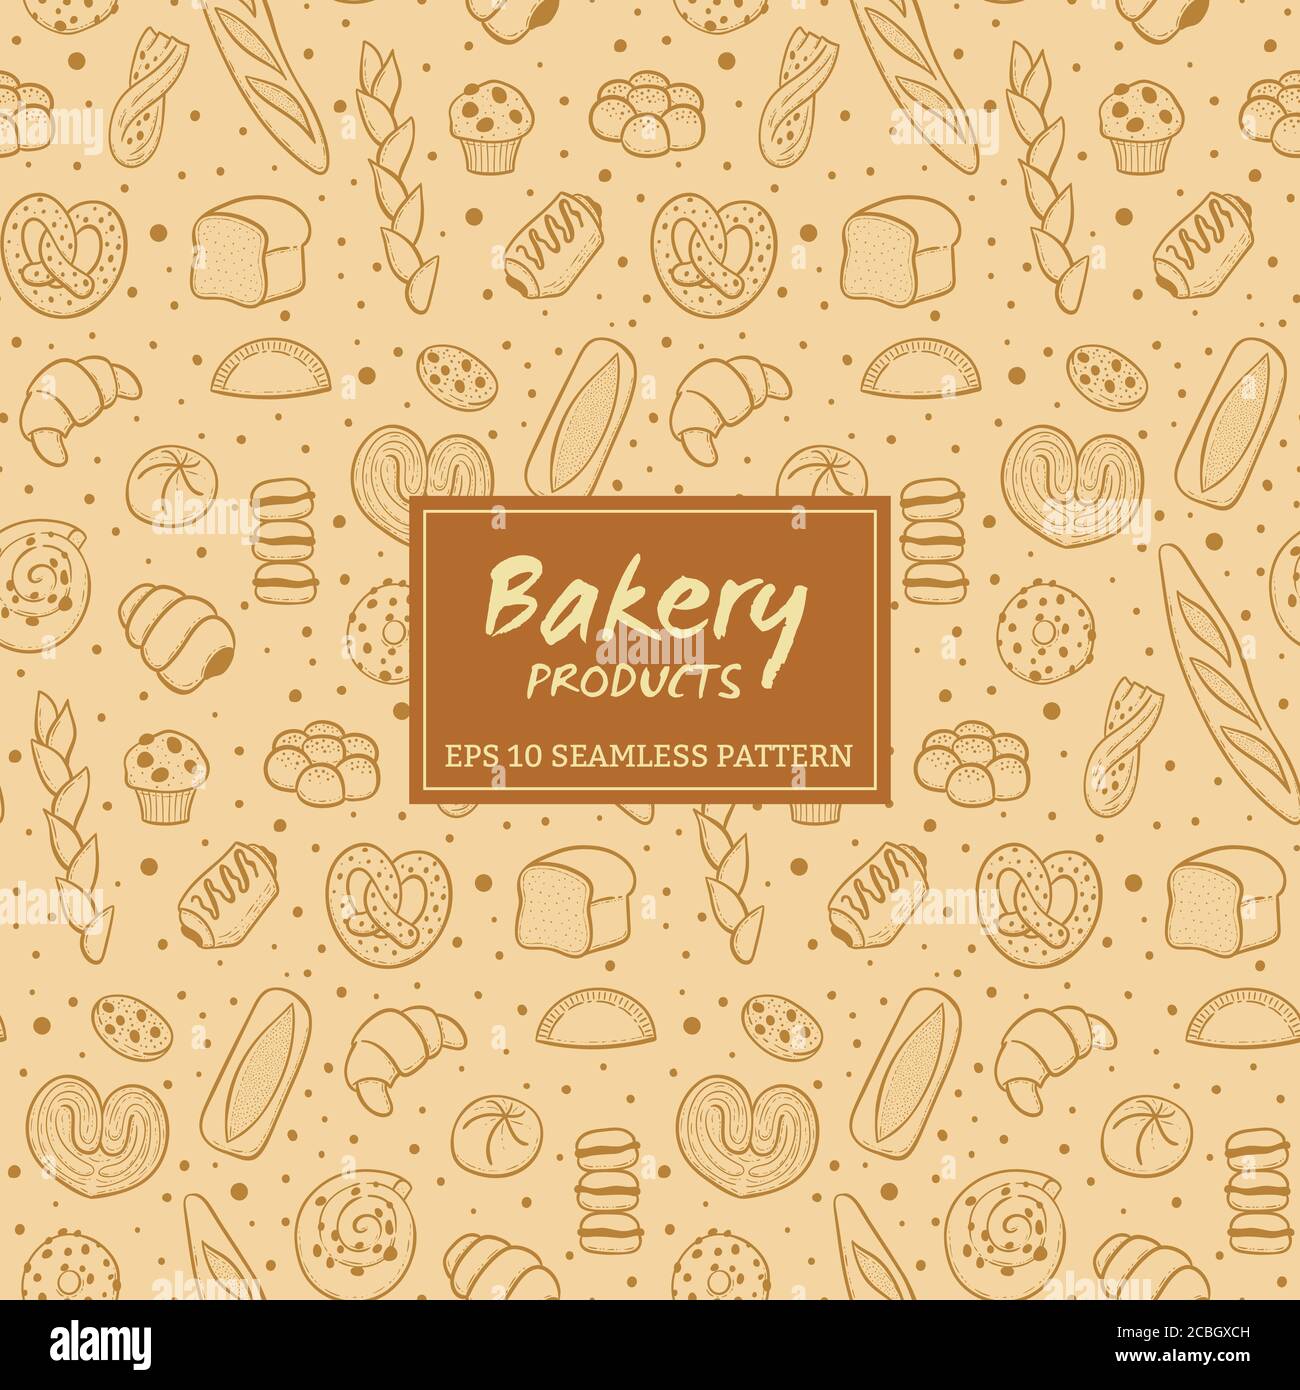 Hand drawn seamless pattern of bread and bakery products. Baked goods background. Vector illustration. Stock Vector